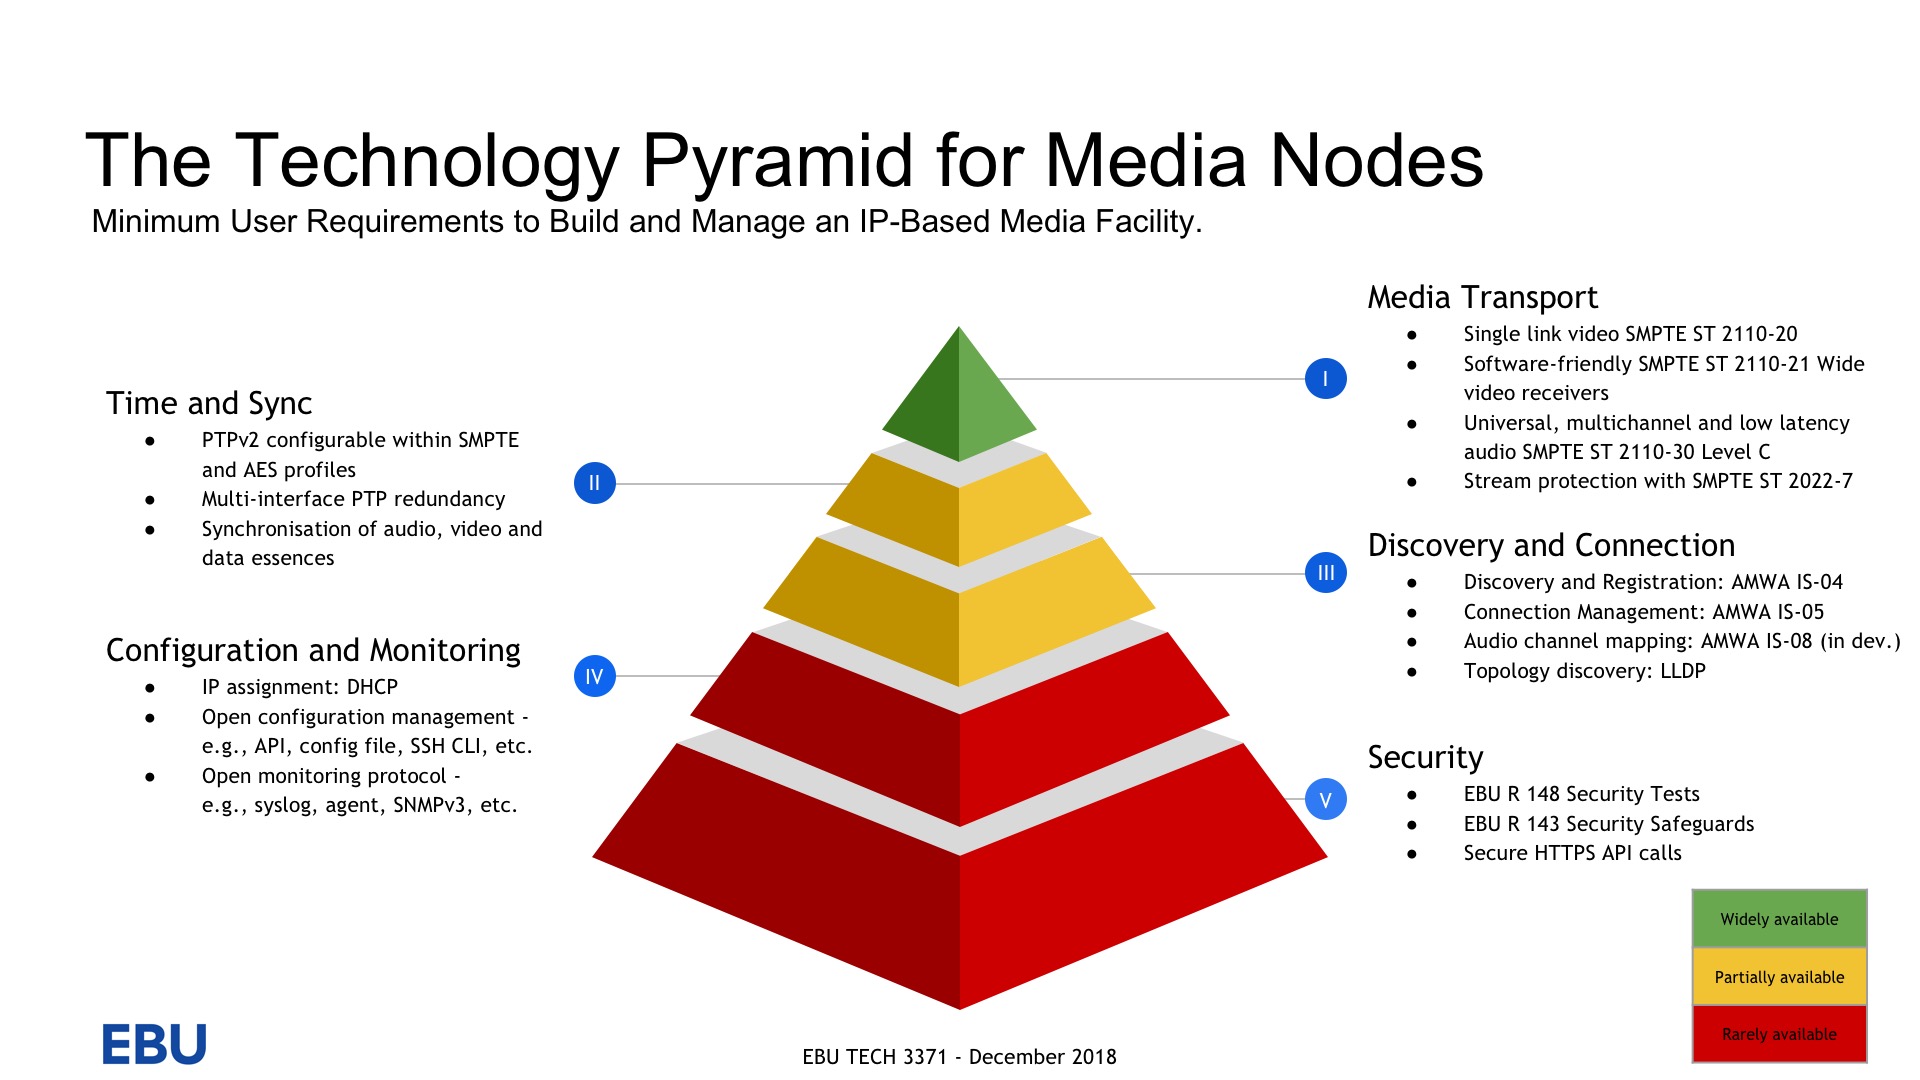 THE TECHNOLOGY PYRAMID FOR MEDIA NODES